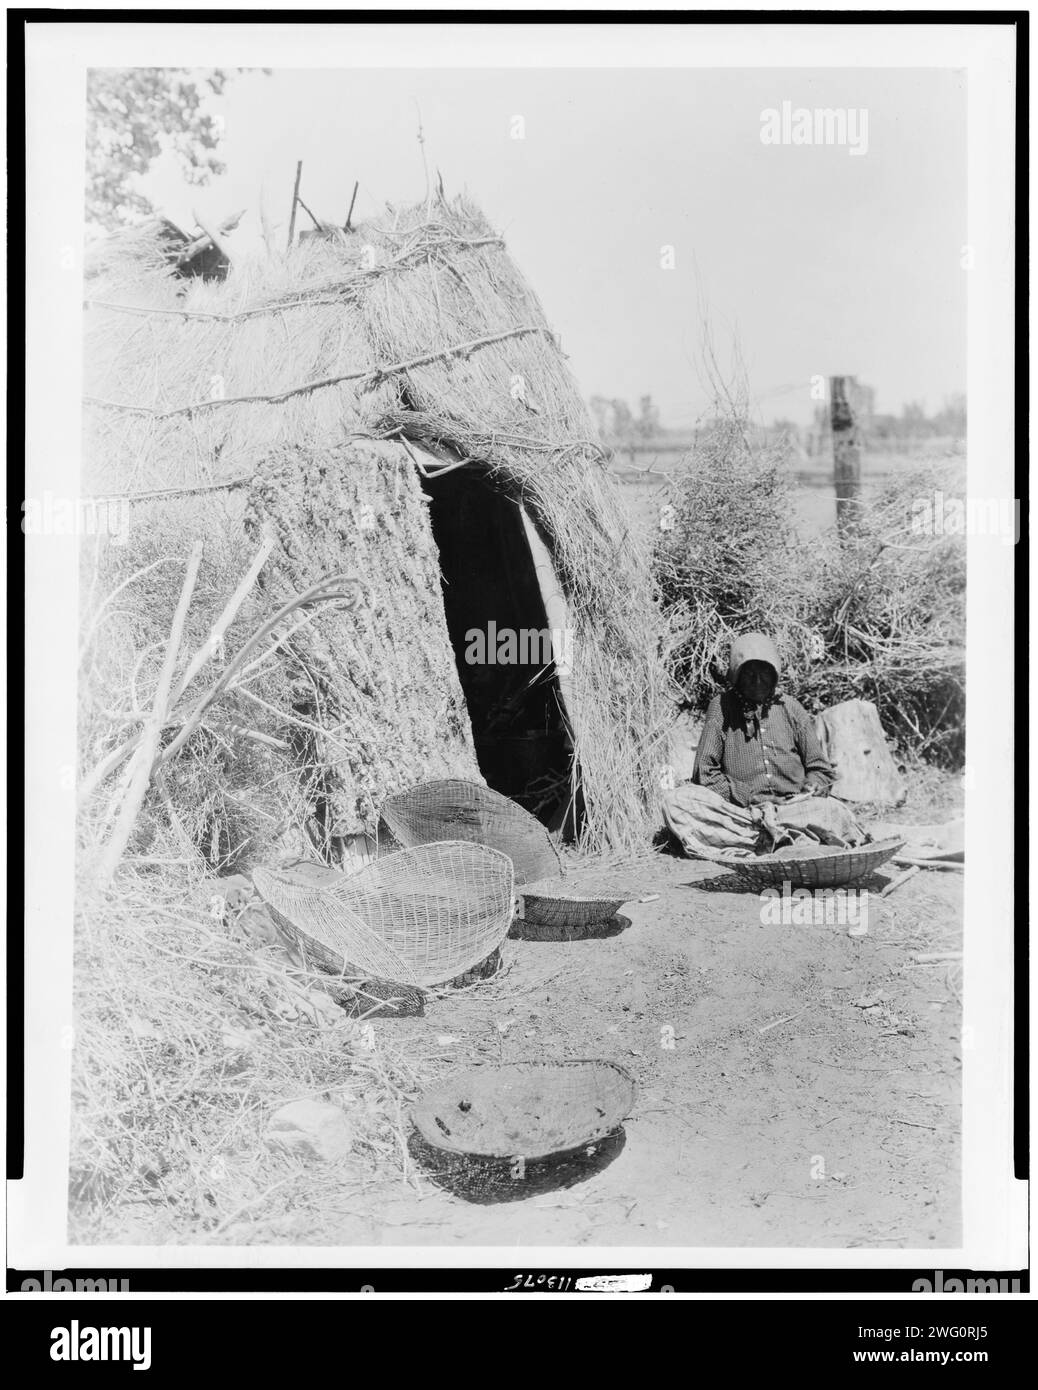 Paviotso house at Walker Lake, c1924. Paviotso woman sitting outside thatched hut with baskets, possibly for winnowing, in foreground. Stock Photo